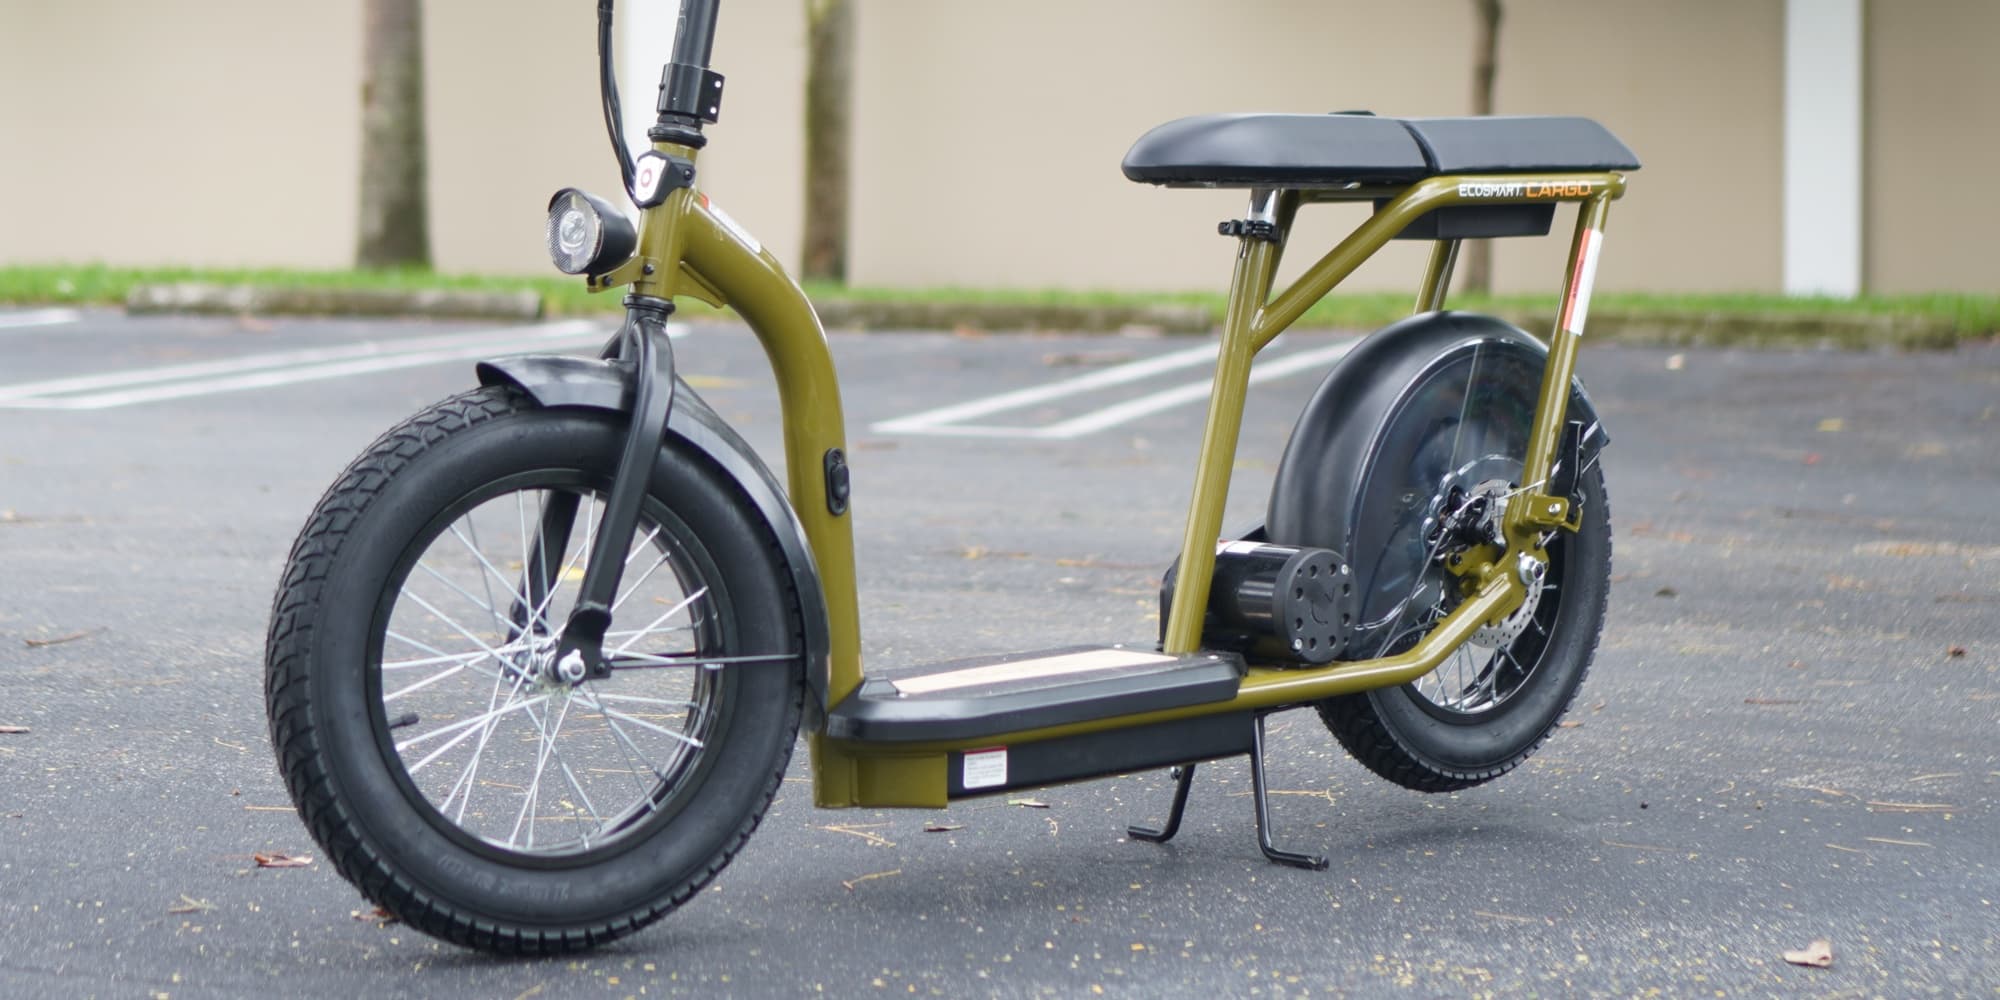 Razor EcoSmart Cargo review: Flying on a 2-seater electric scooter